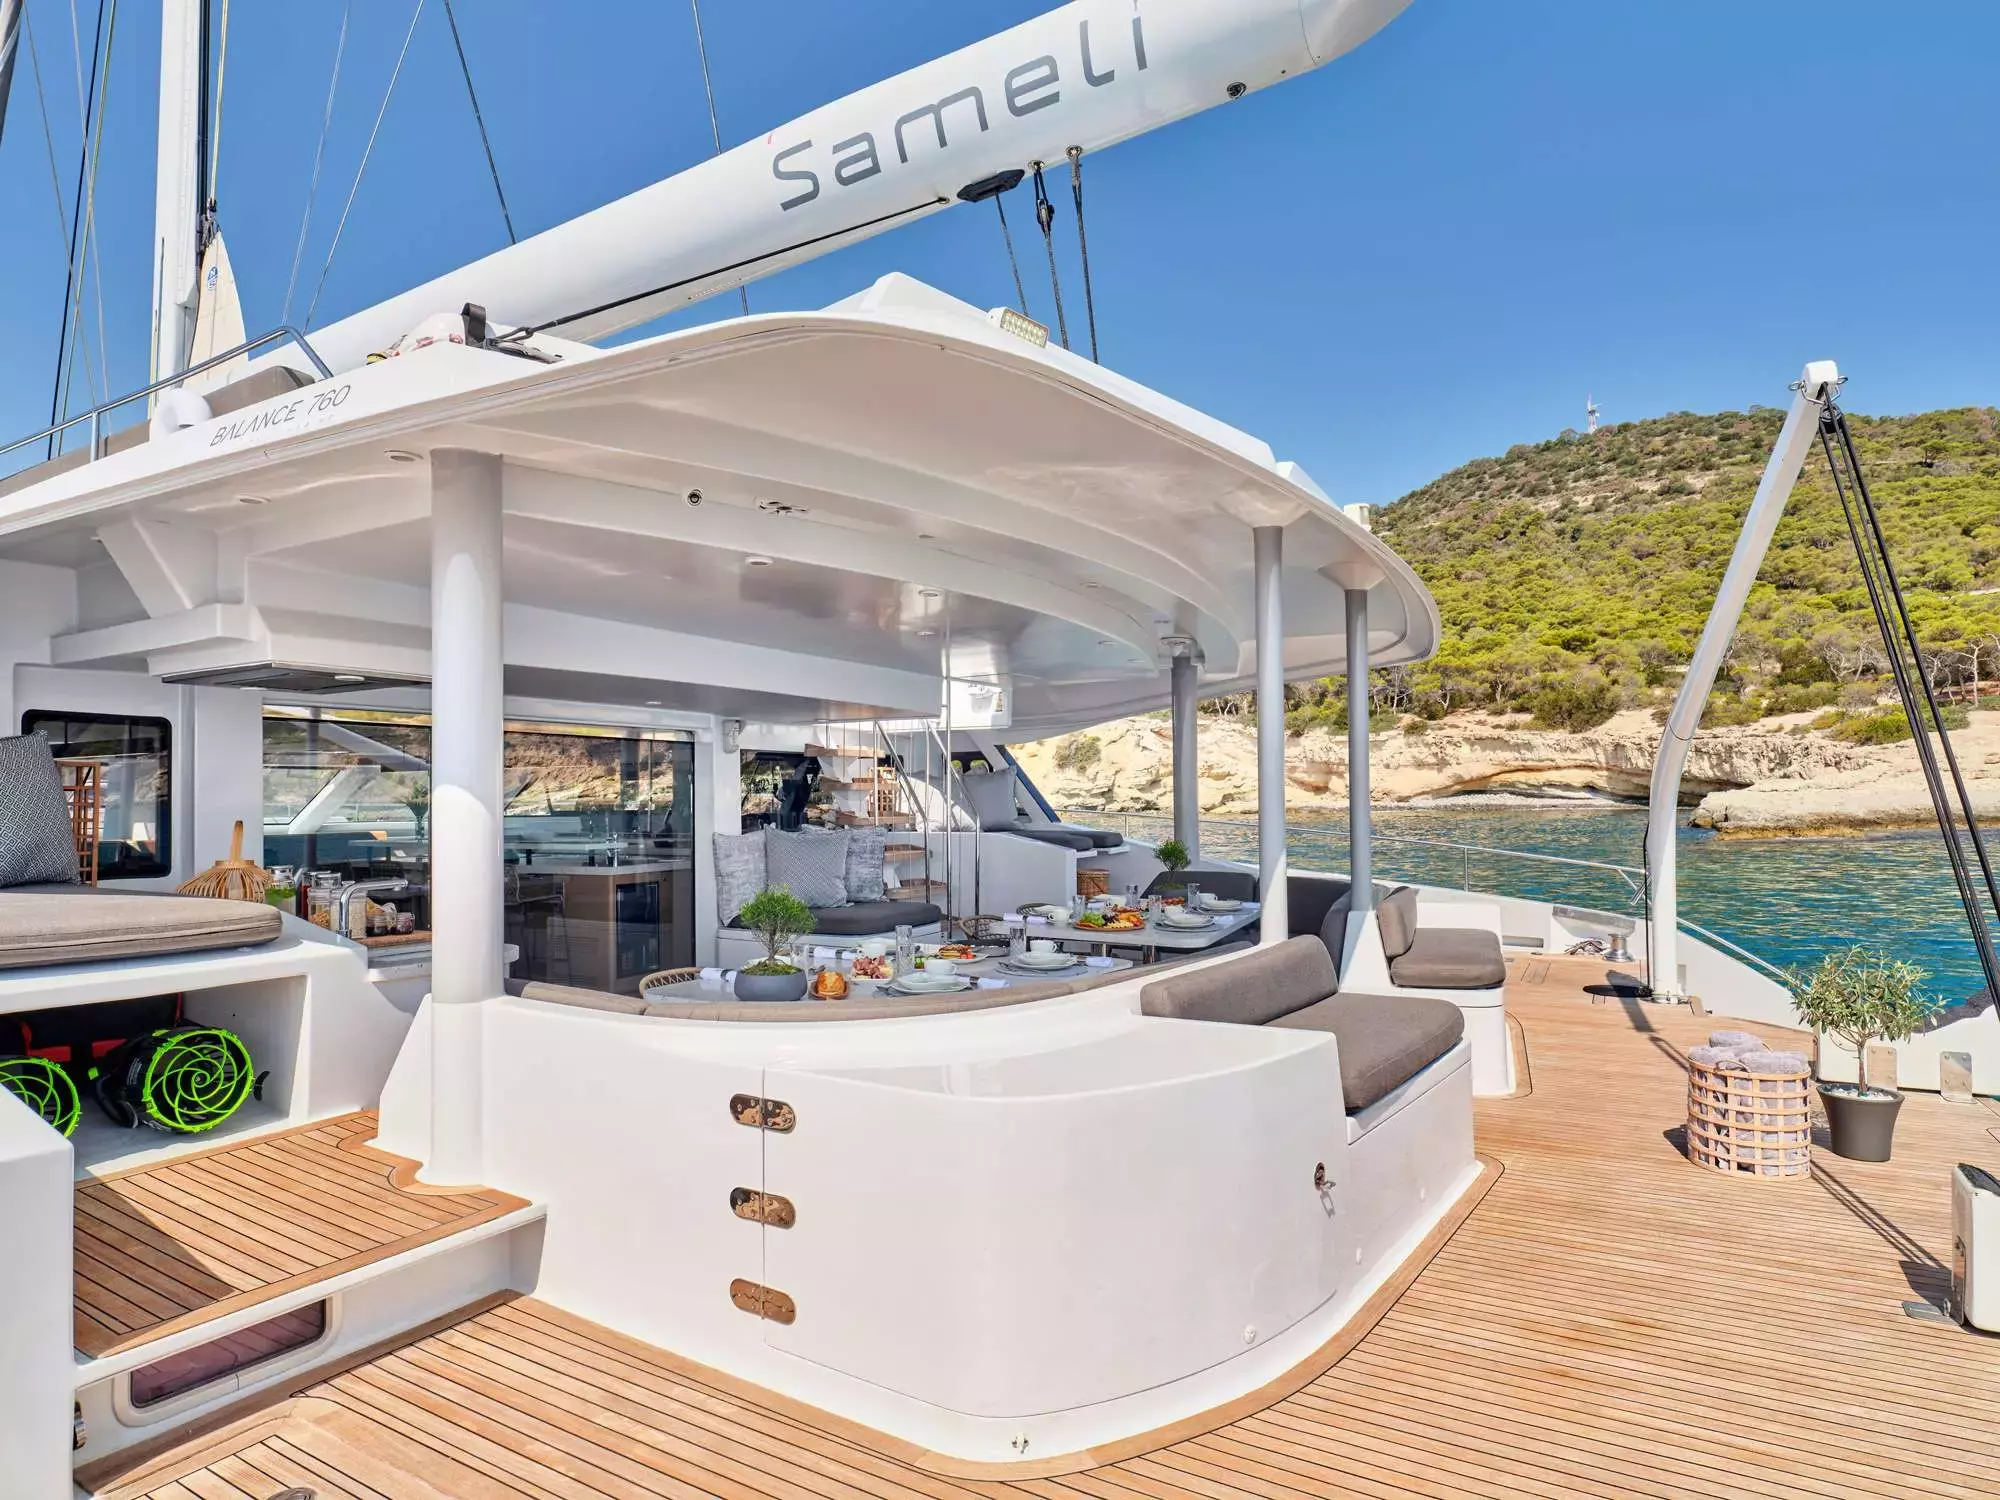 Sameli by Two Oceans - Top rates for a Charter of a private Sailing Catamaran in Greece